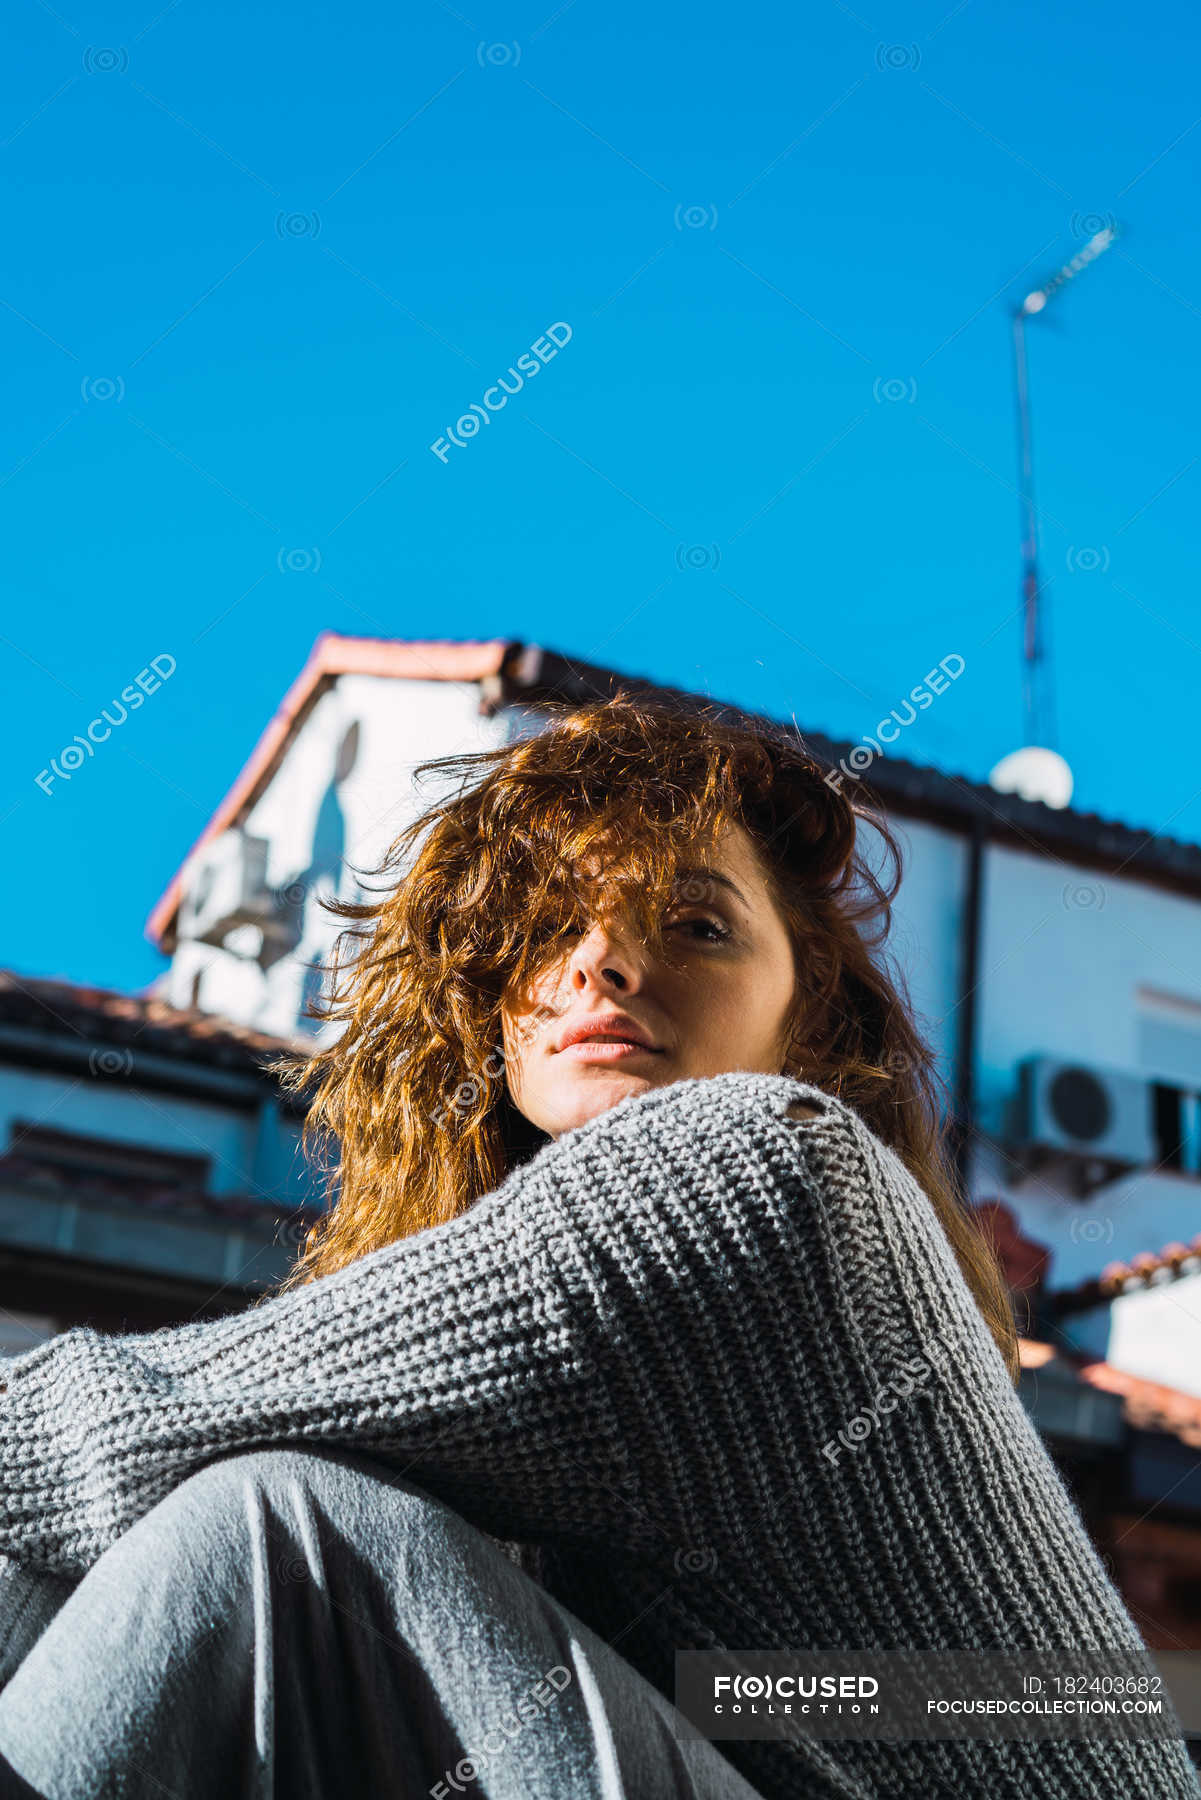 100 Curly Hair Pictures  Download Free Images on Unsplash